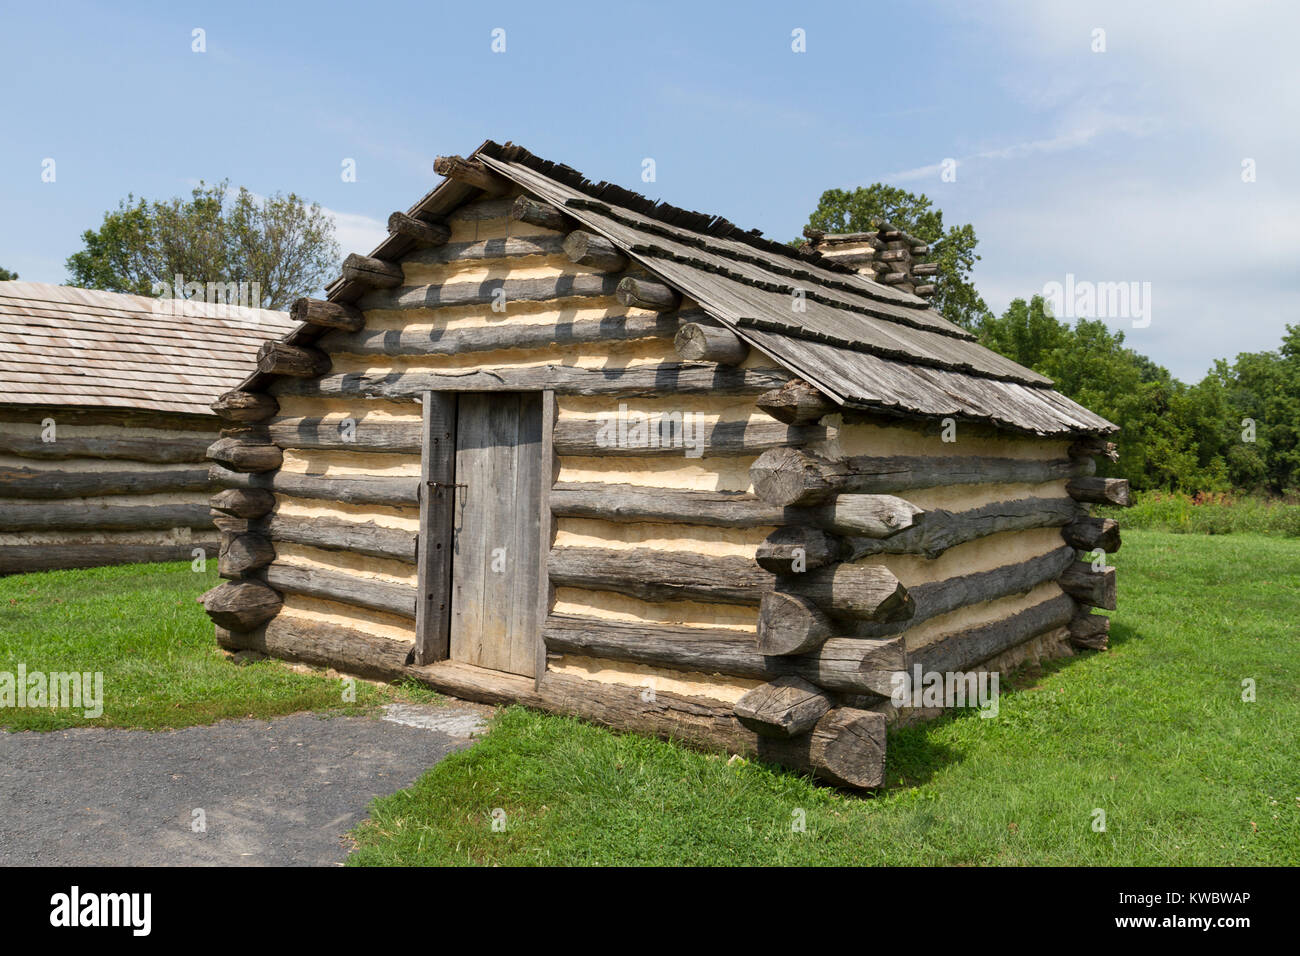 Replica huts, part of a reconstructed camp in Valley Forge National Historical Park (National Park Service), Valley Forge, Pennsylvania, USA. Stock Photo